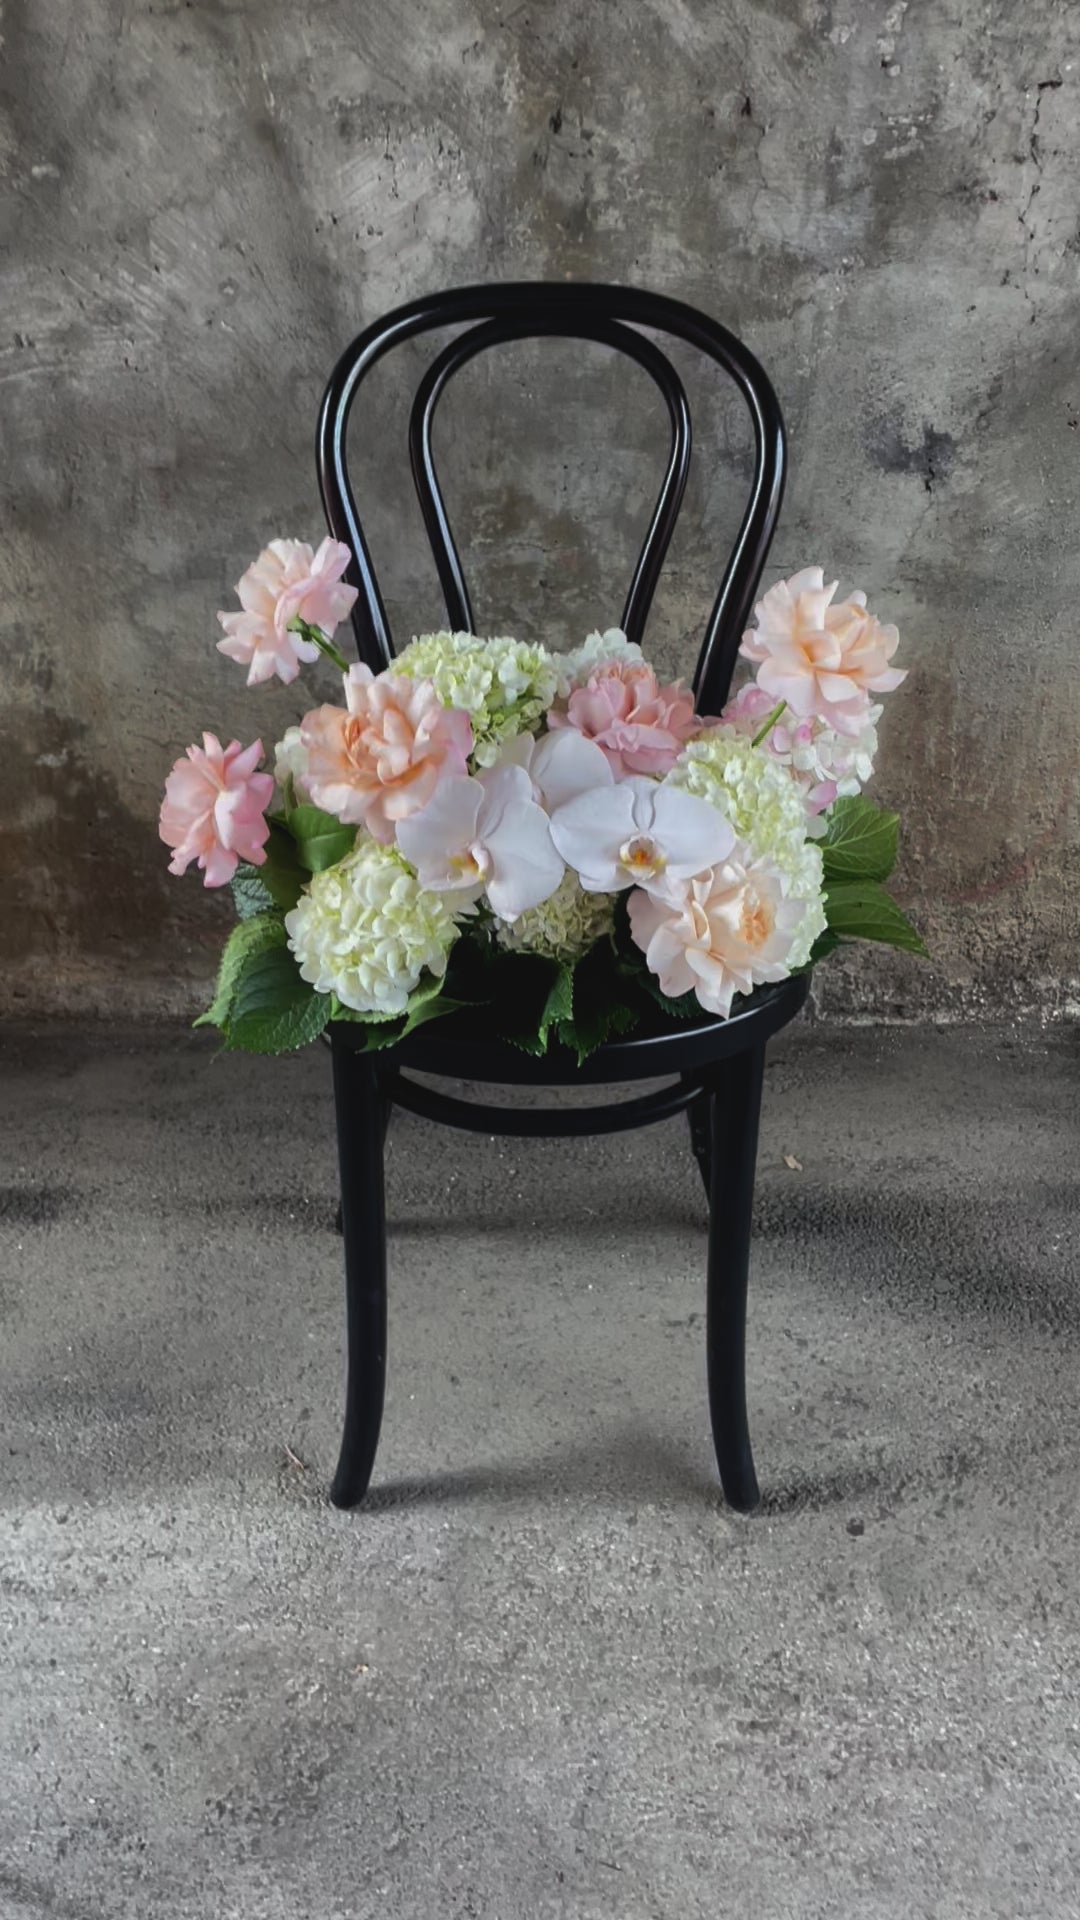 Video of A floral hedge in white, blush and green tones, sitting on a black bentwood chair with a concrete wall background.